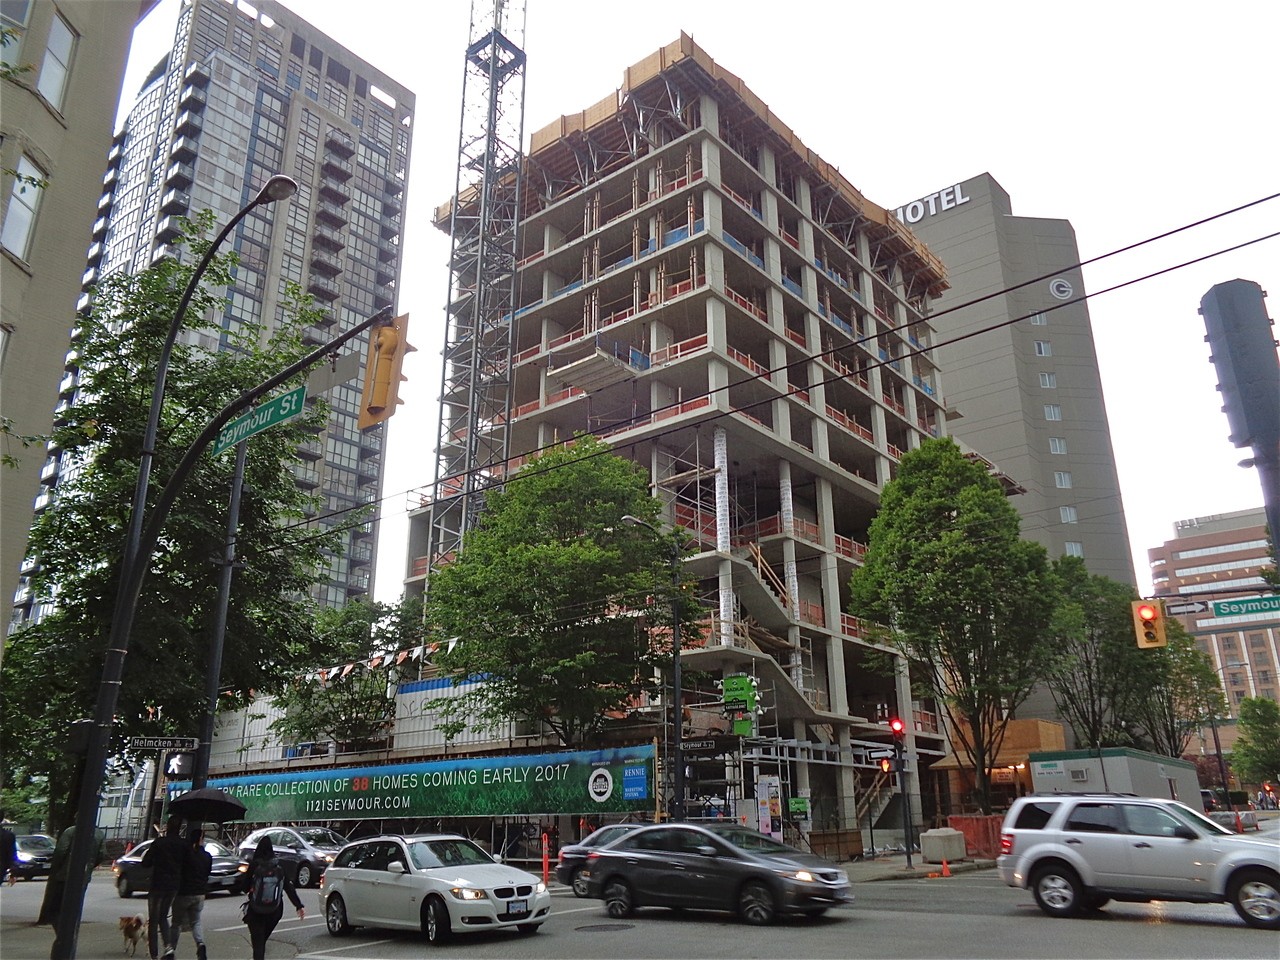 Social Housing Complex at 1107 Seymour Street on the Rise SkyriseCities